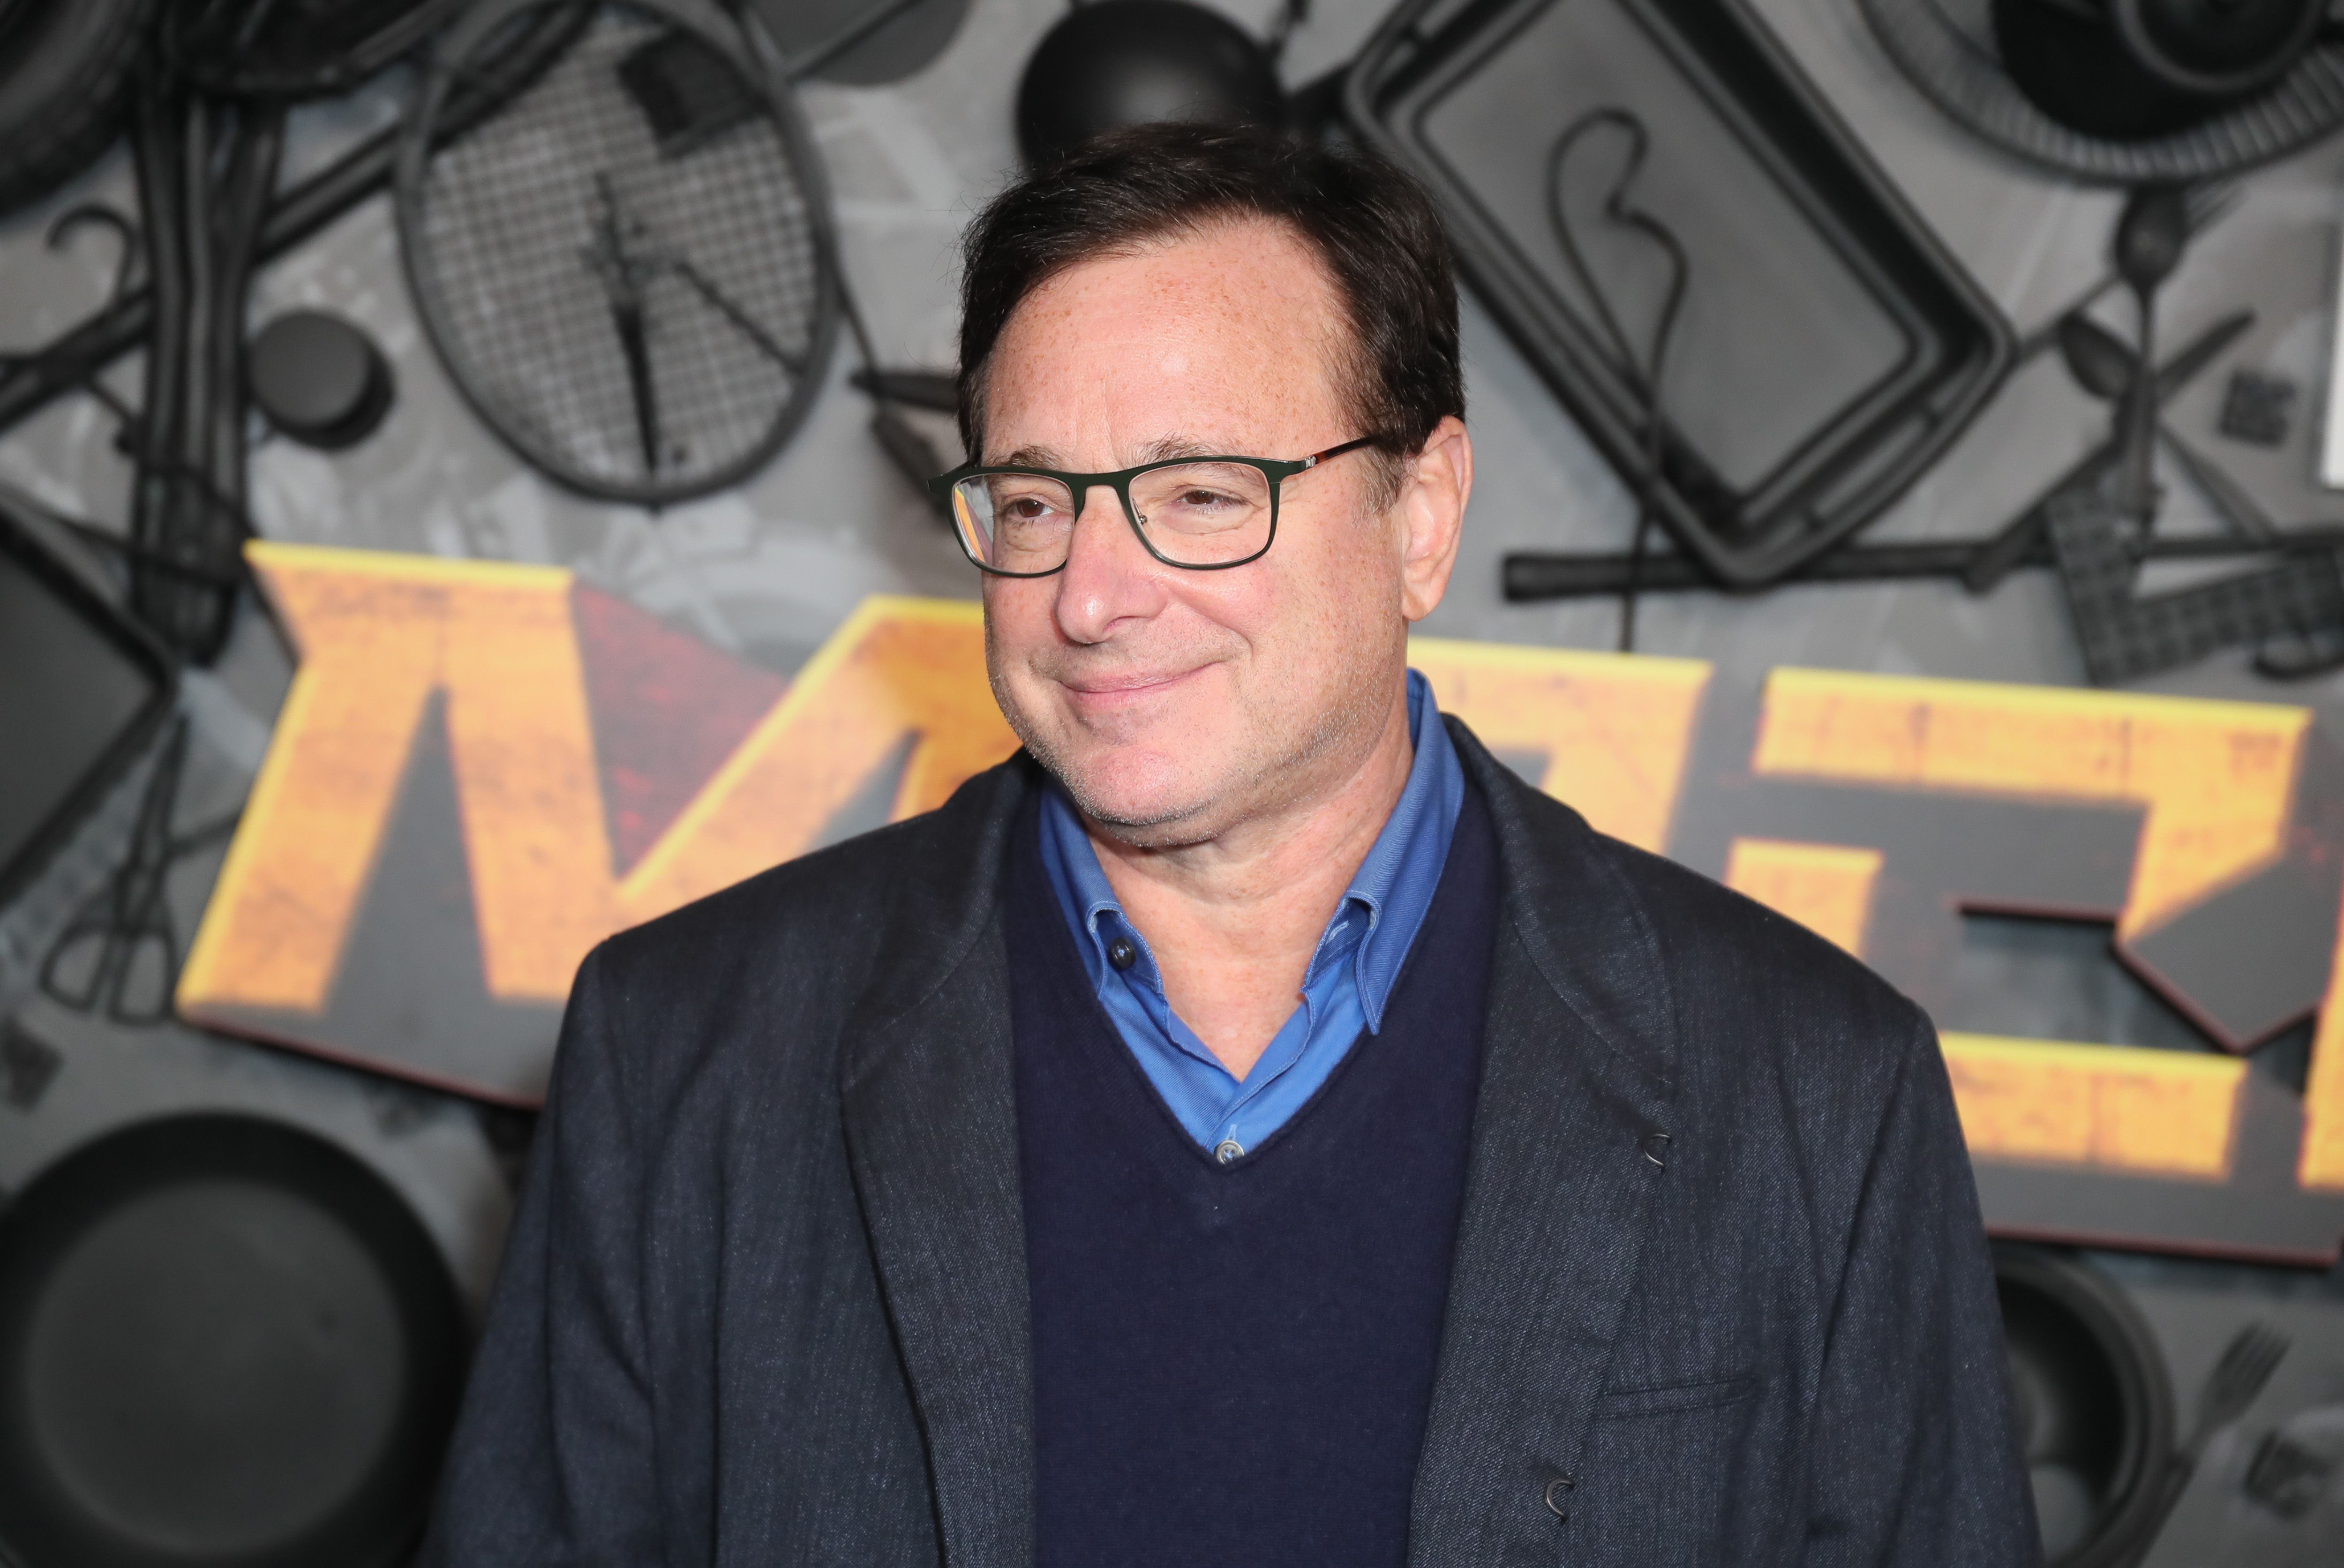 Bob Saget attends the red carpet premiere and party for Peacock's new comedy series "MacGruber" at California Science Center on December 8, 2021, in Los Angeles, California. | Source: Getty Images